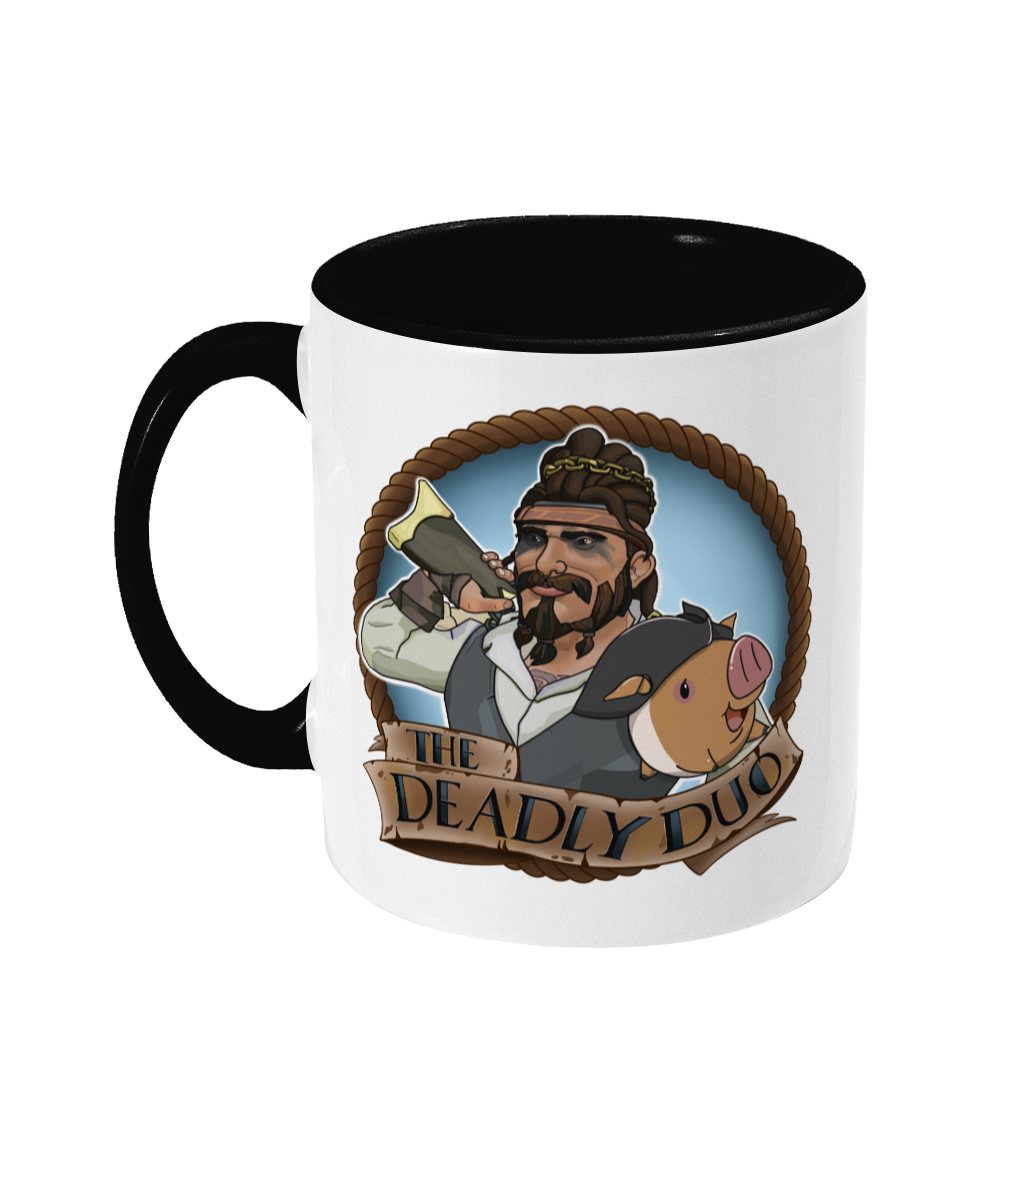 Rob Raven 'The deadly duo' Two Toned Mug